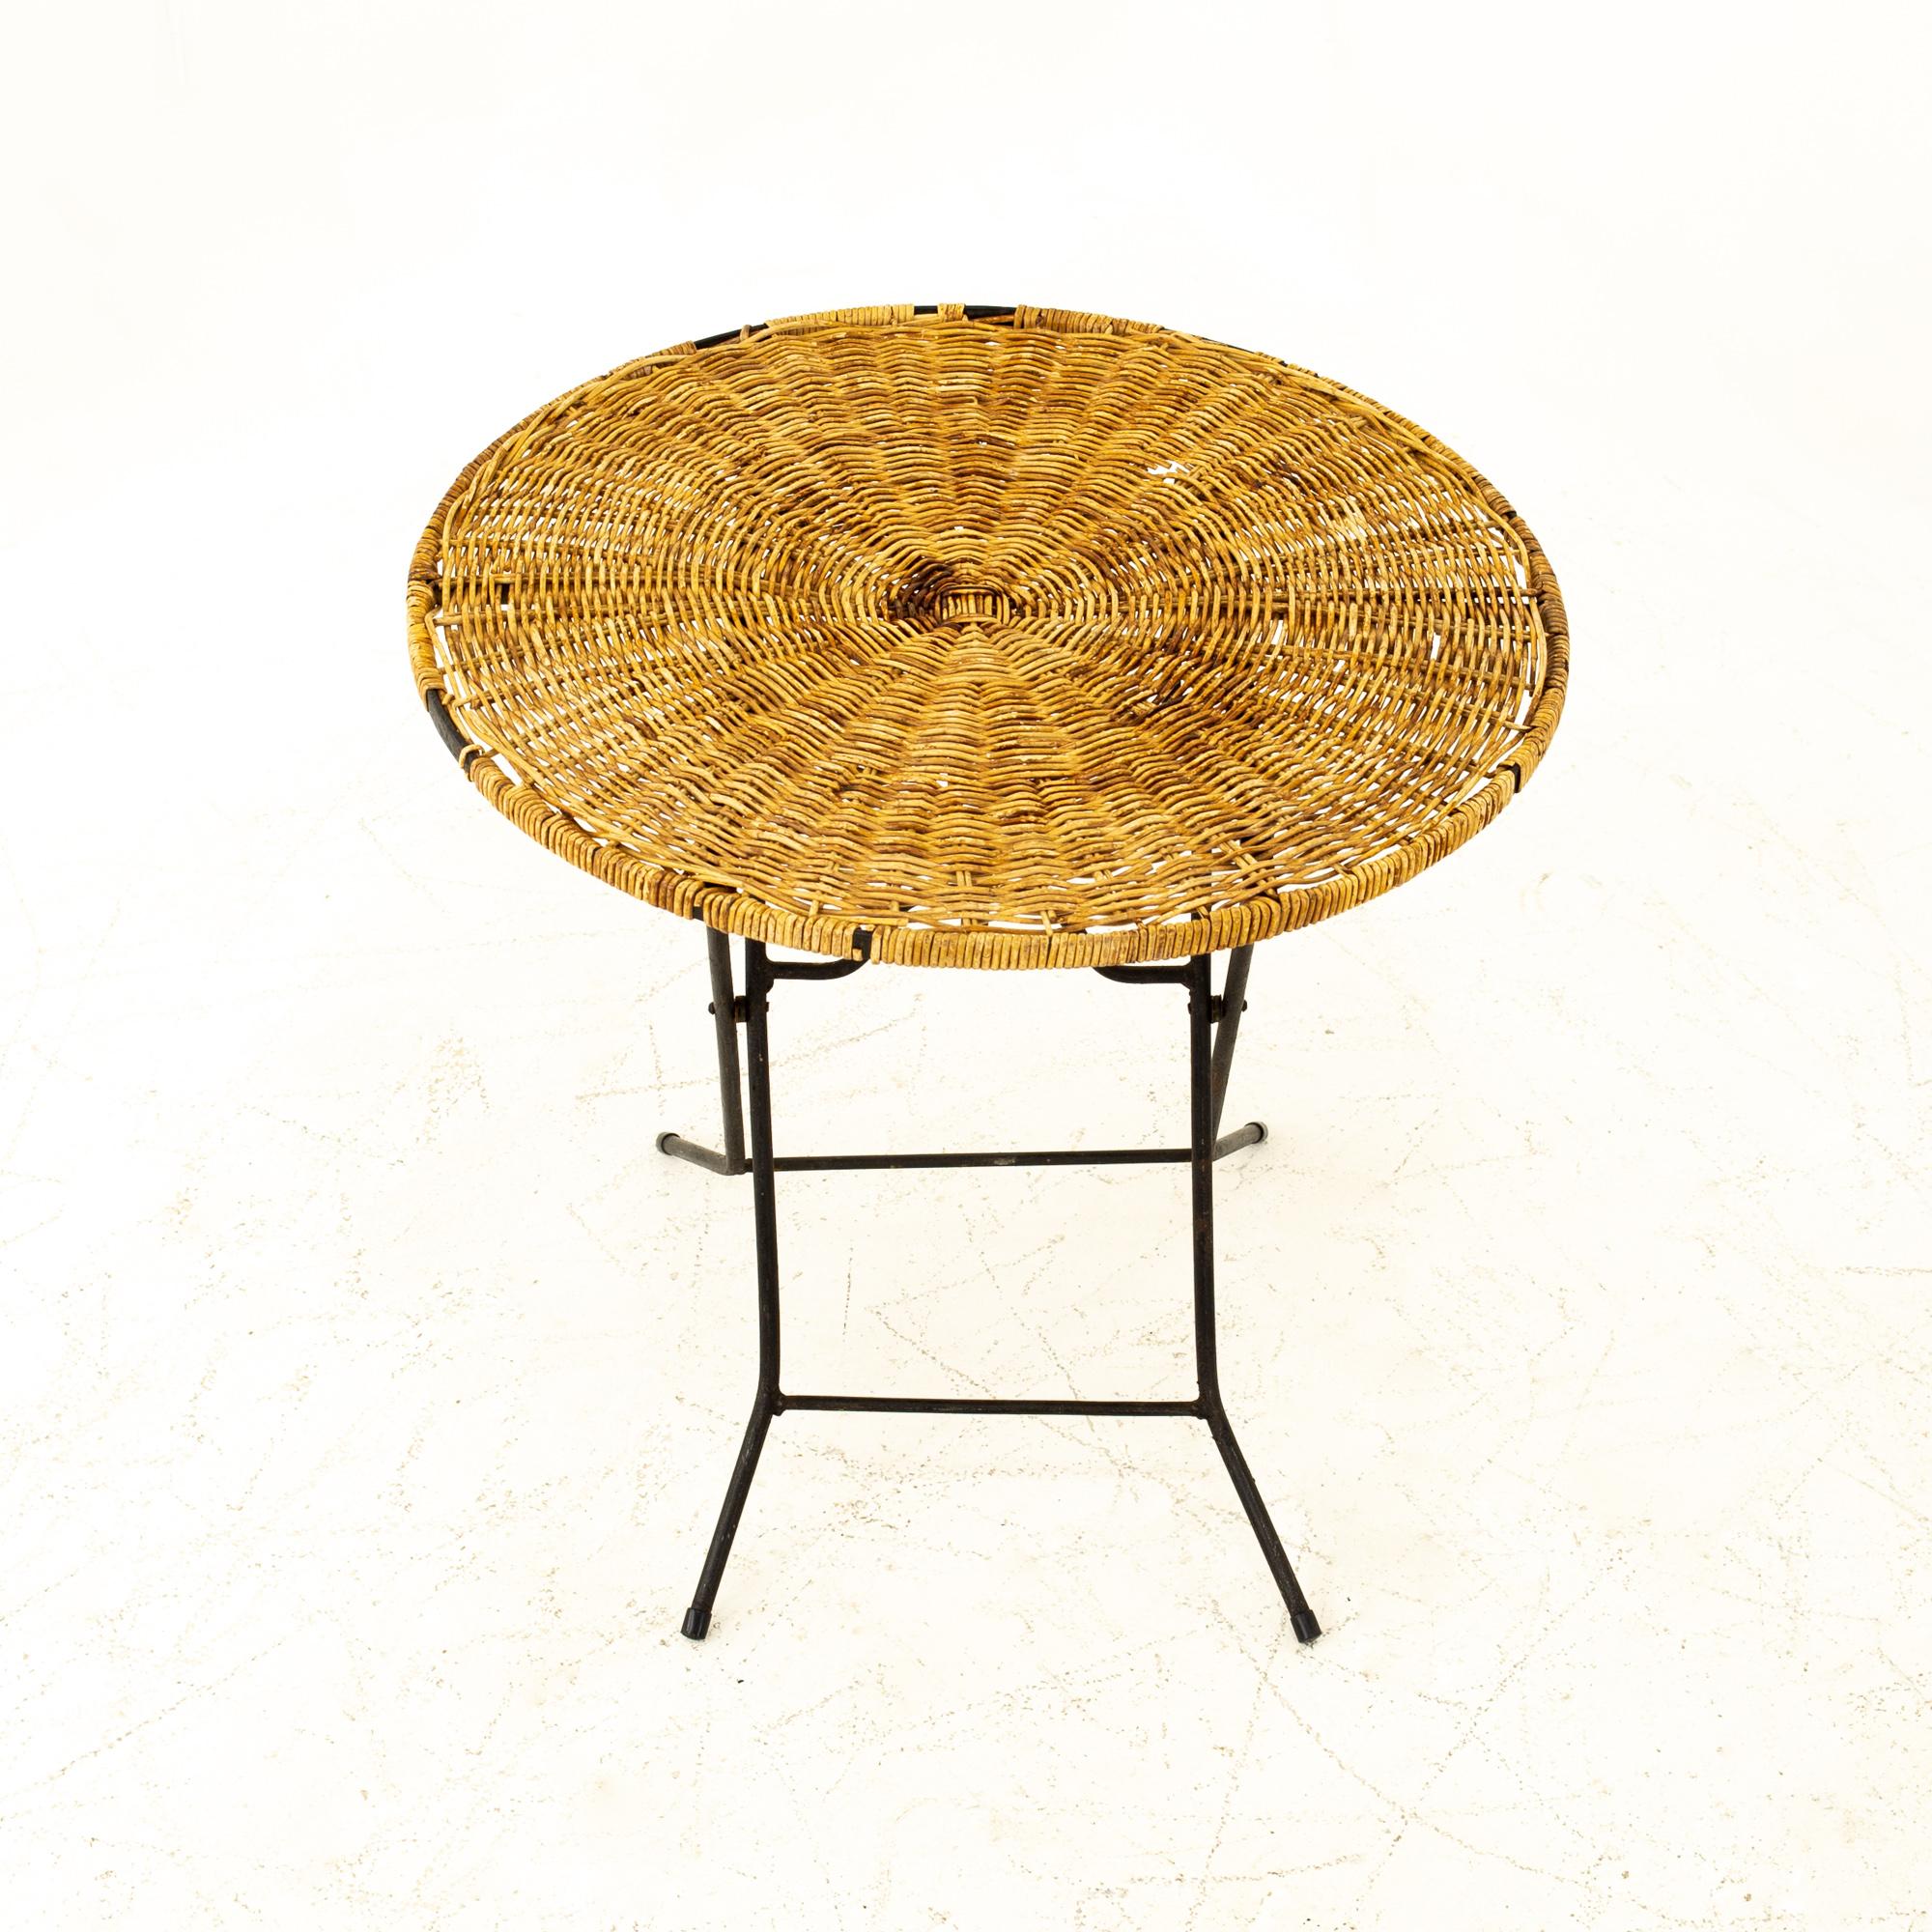 Mid century rattan top folding side end table
Table measures: 23.25 wide x 23.25 deep x 22.25 high

All pieces of furniture can be had in what we call restored vintage condition. That means the piece is restored upon purchase so it’s free of